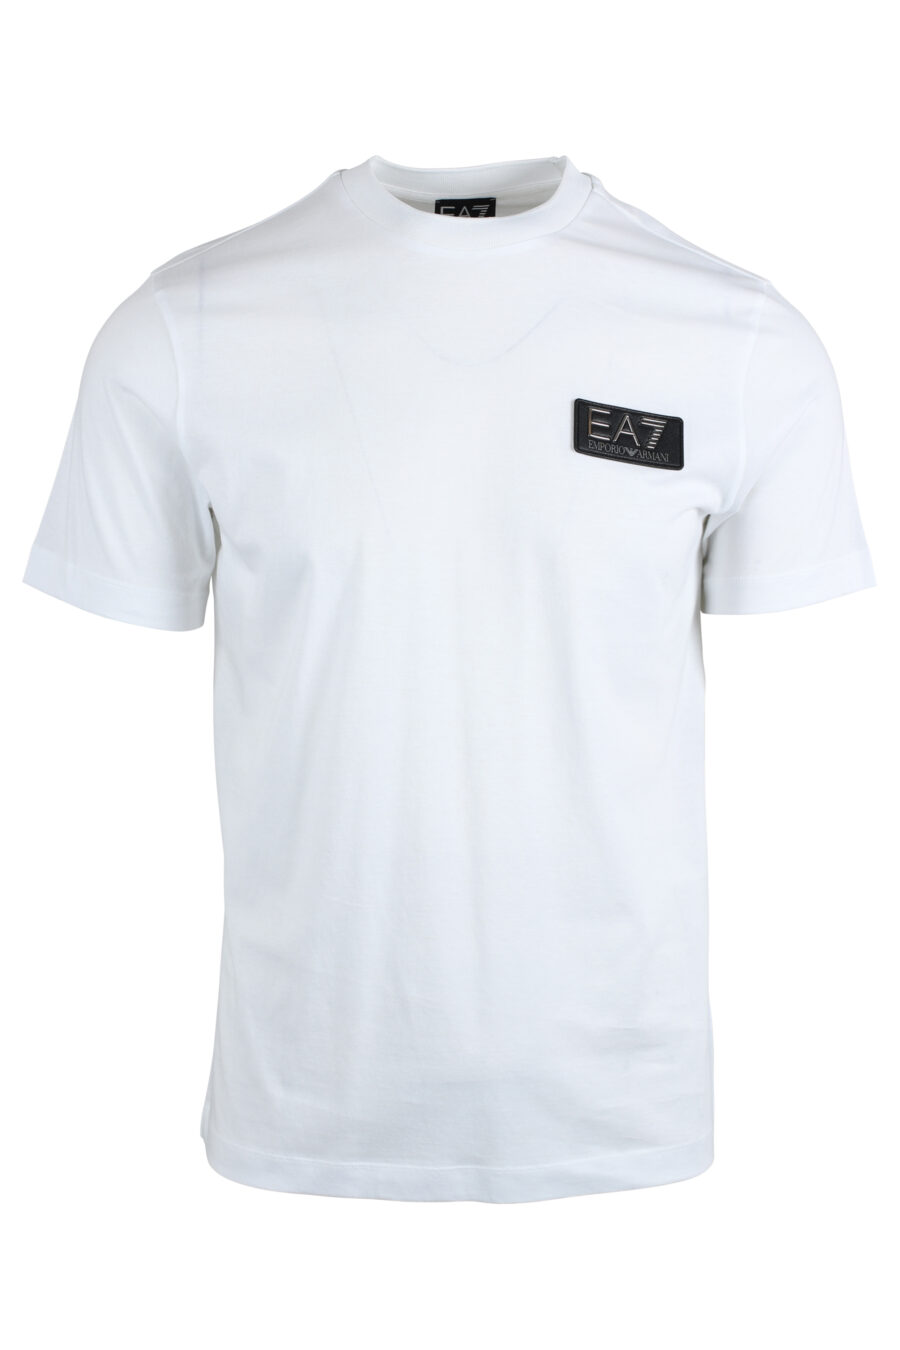 White T-shirt with minilogue in metal patch - IMG 4800